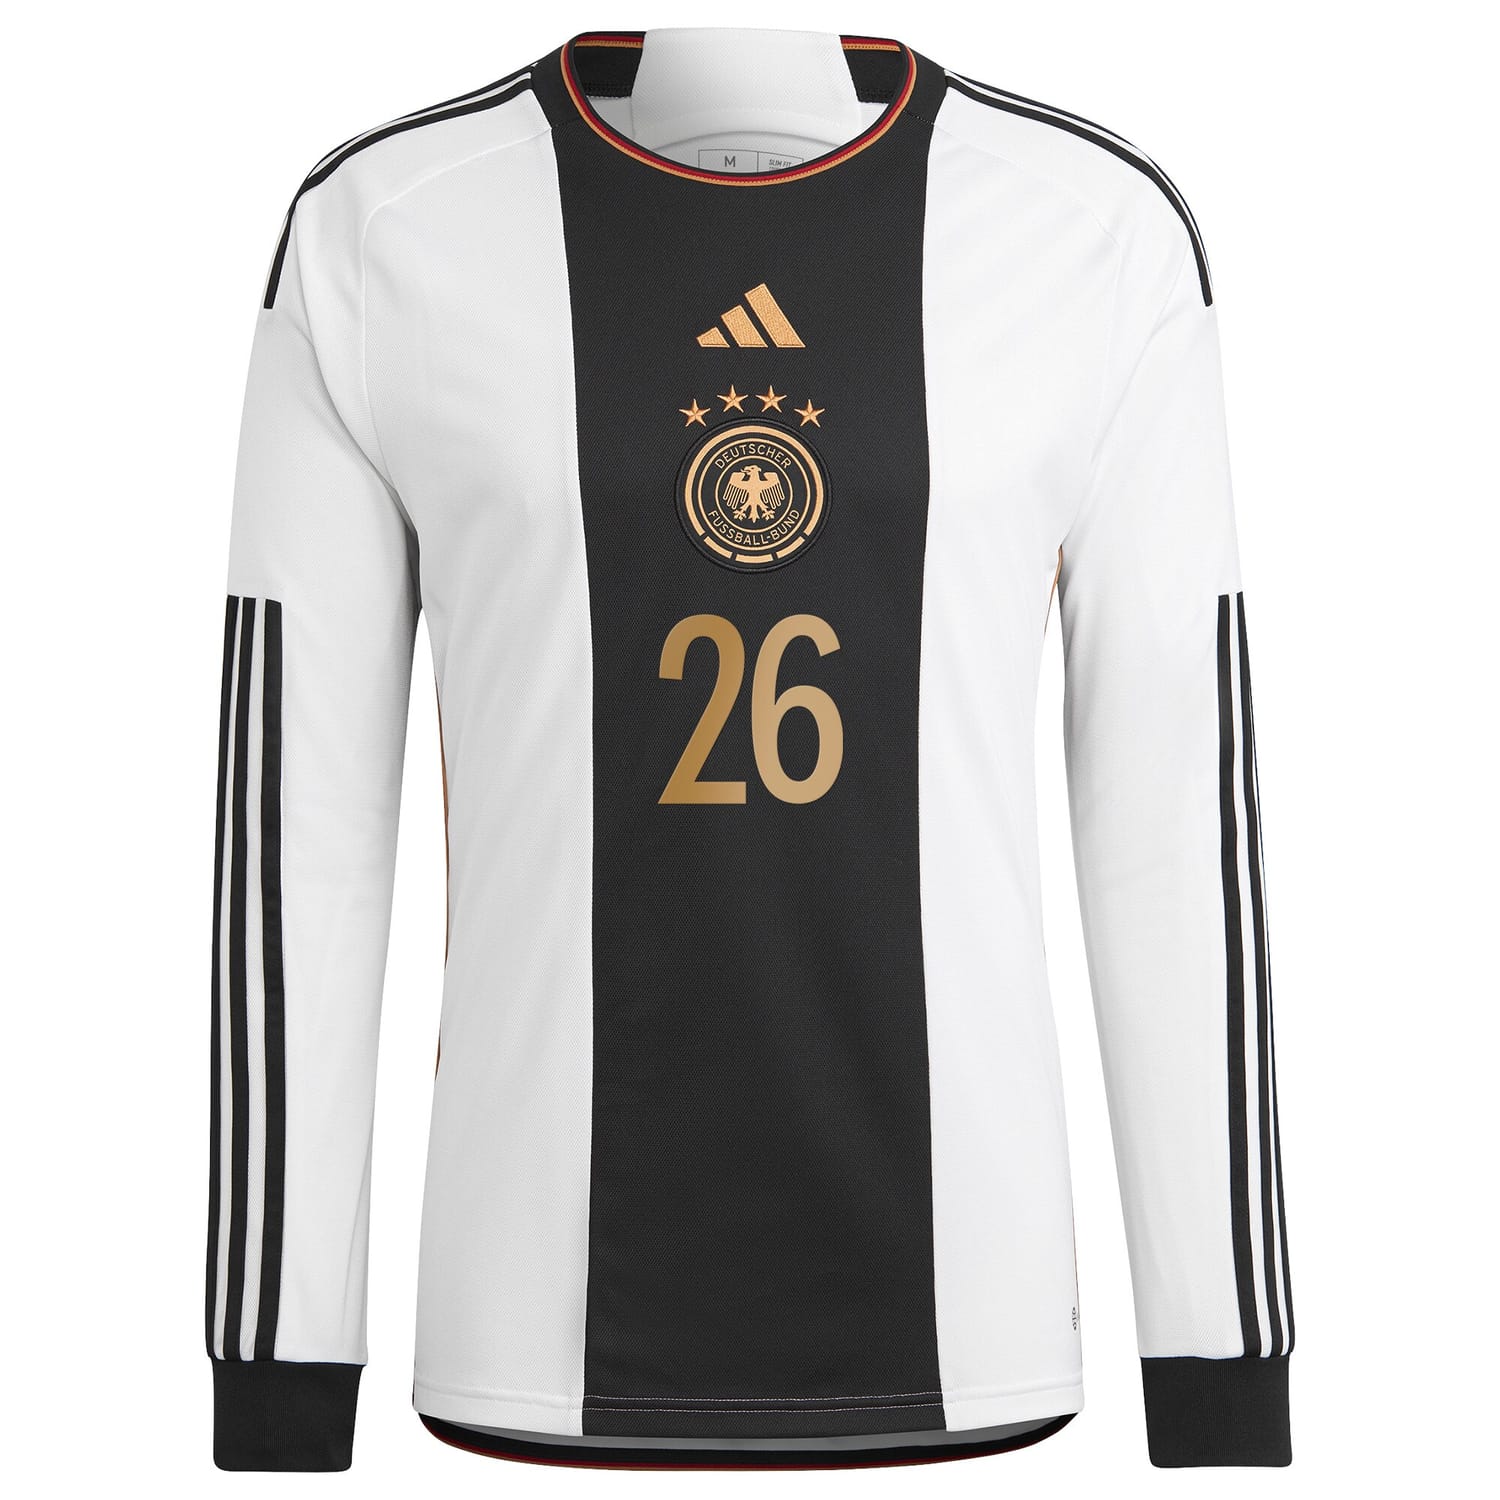 Germany National Team Home Jersey Shirt Long Sleeve 2022 player Youssoufa Moukoko 26 printing for Men